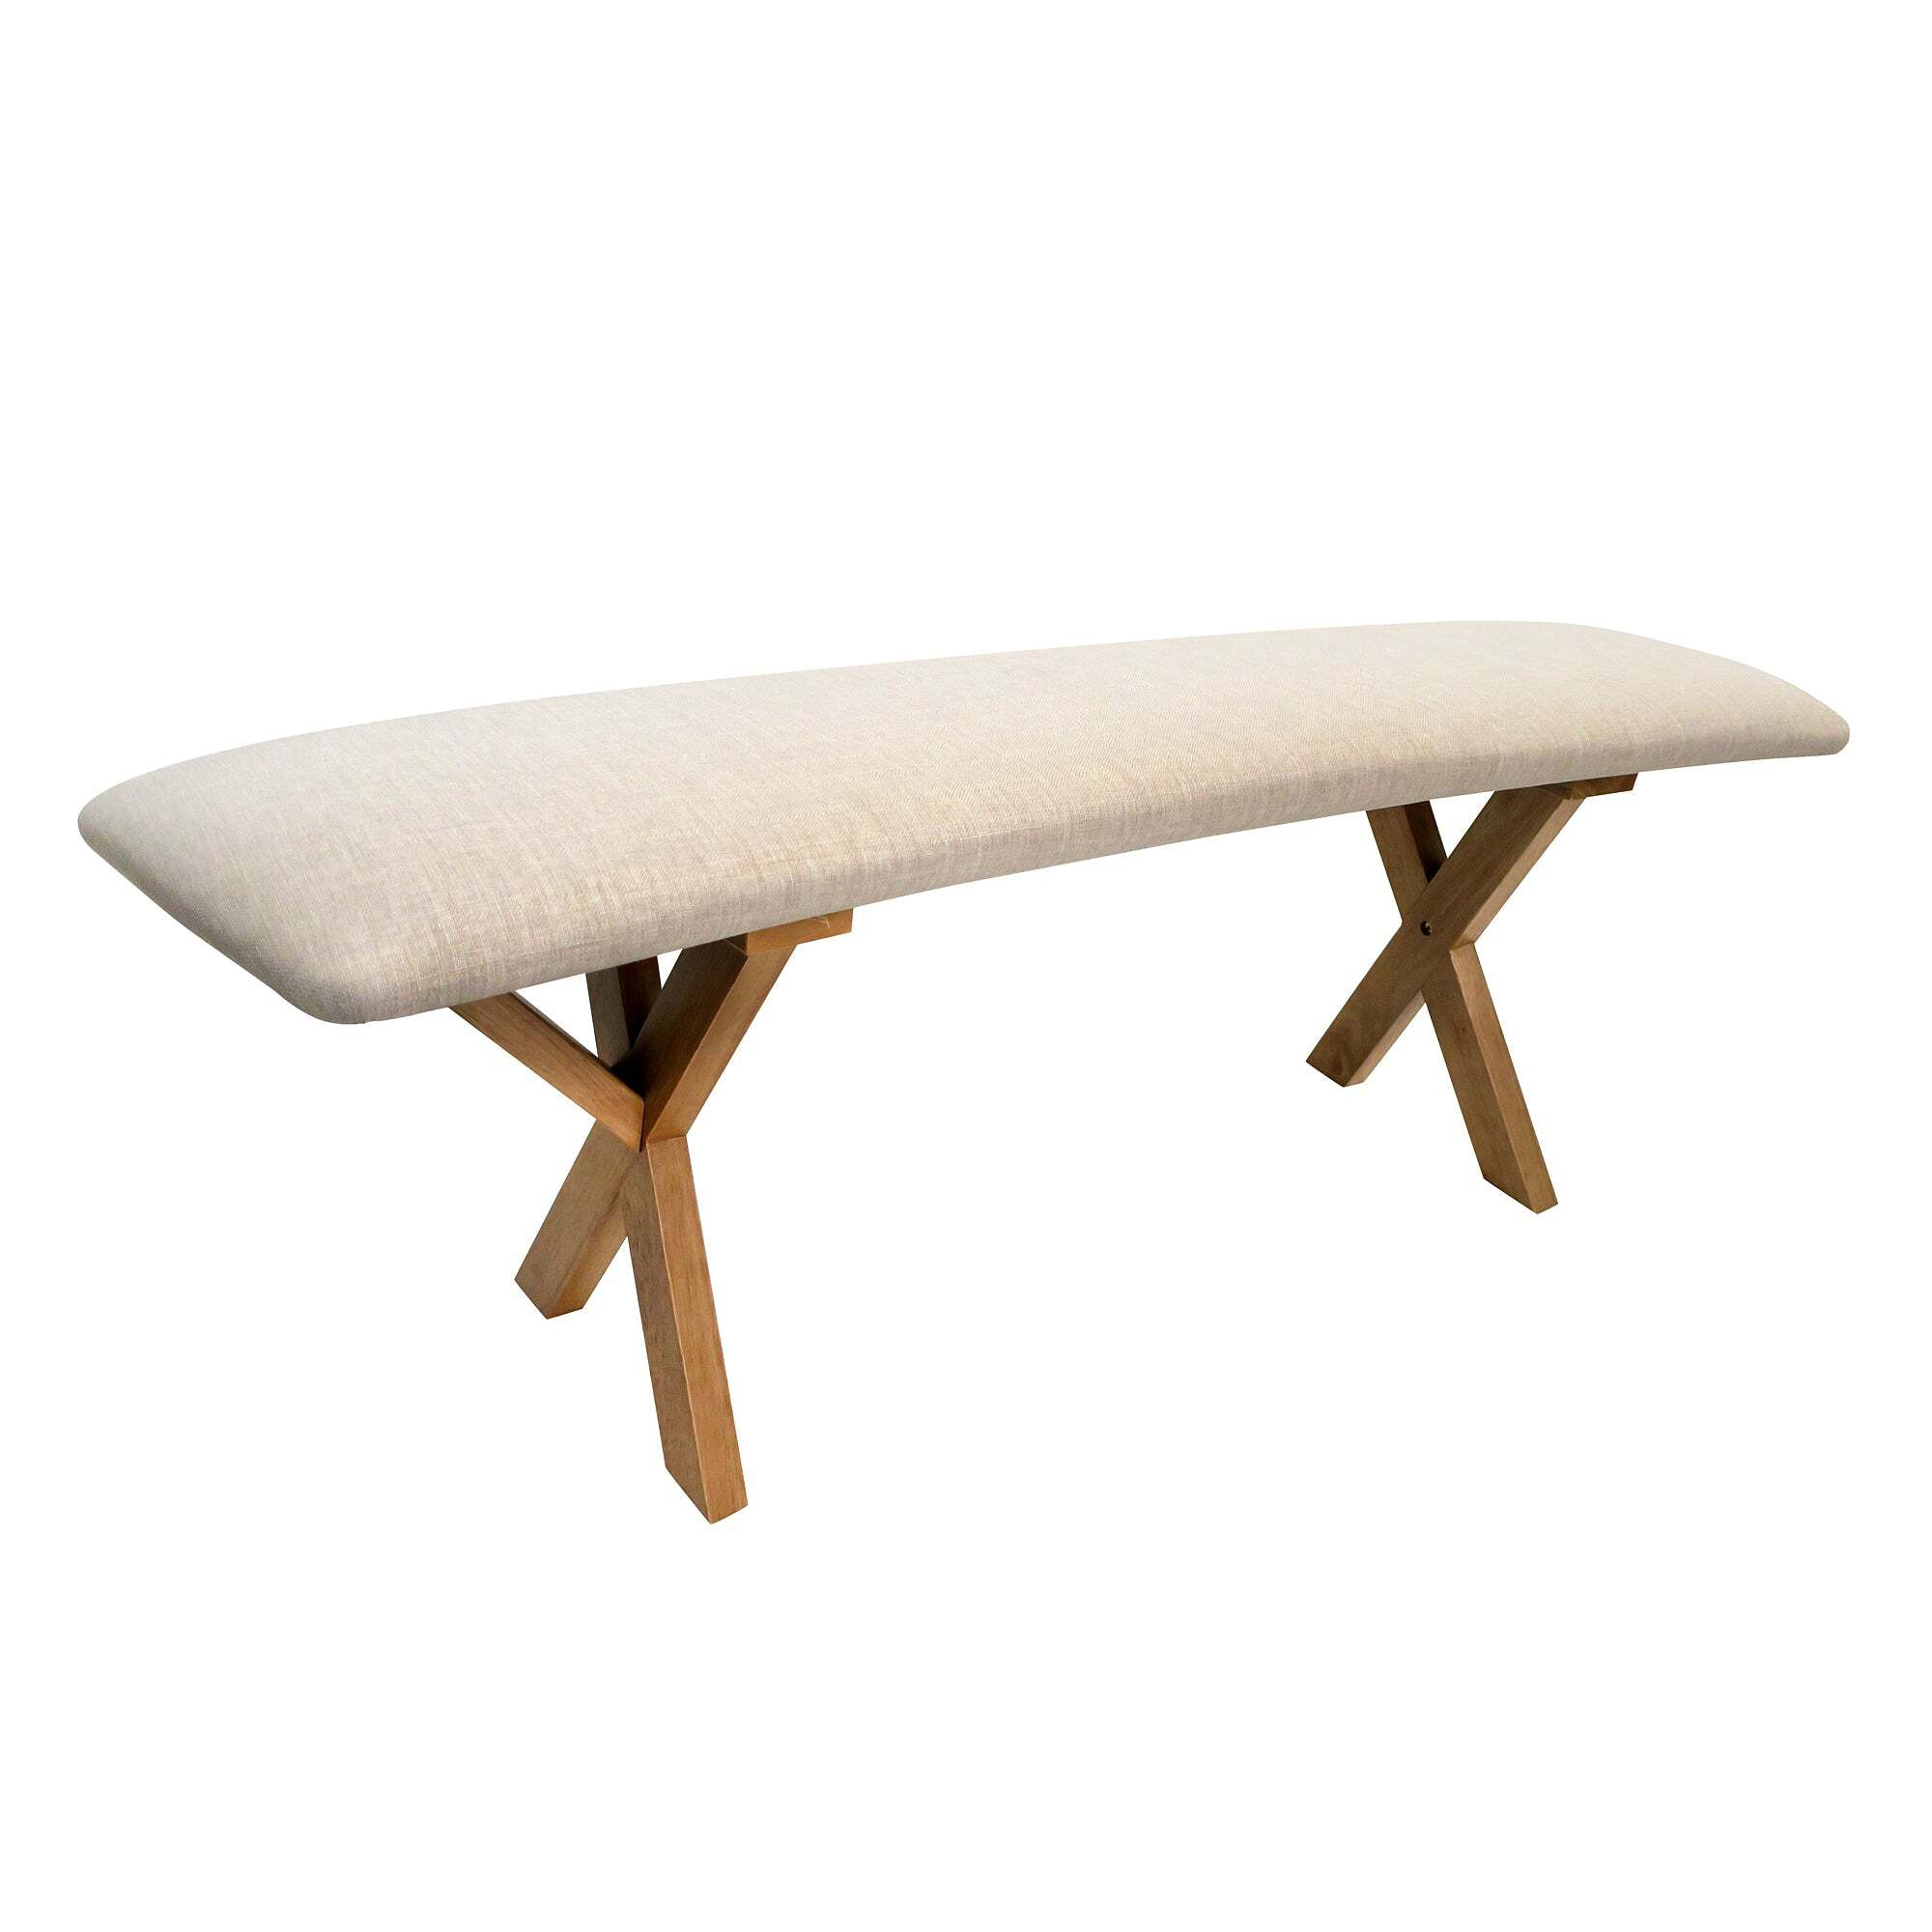 Teddy's Collection Viborg Dining Bench - image 1